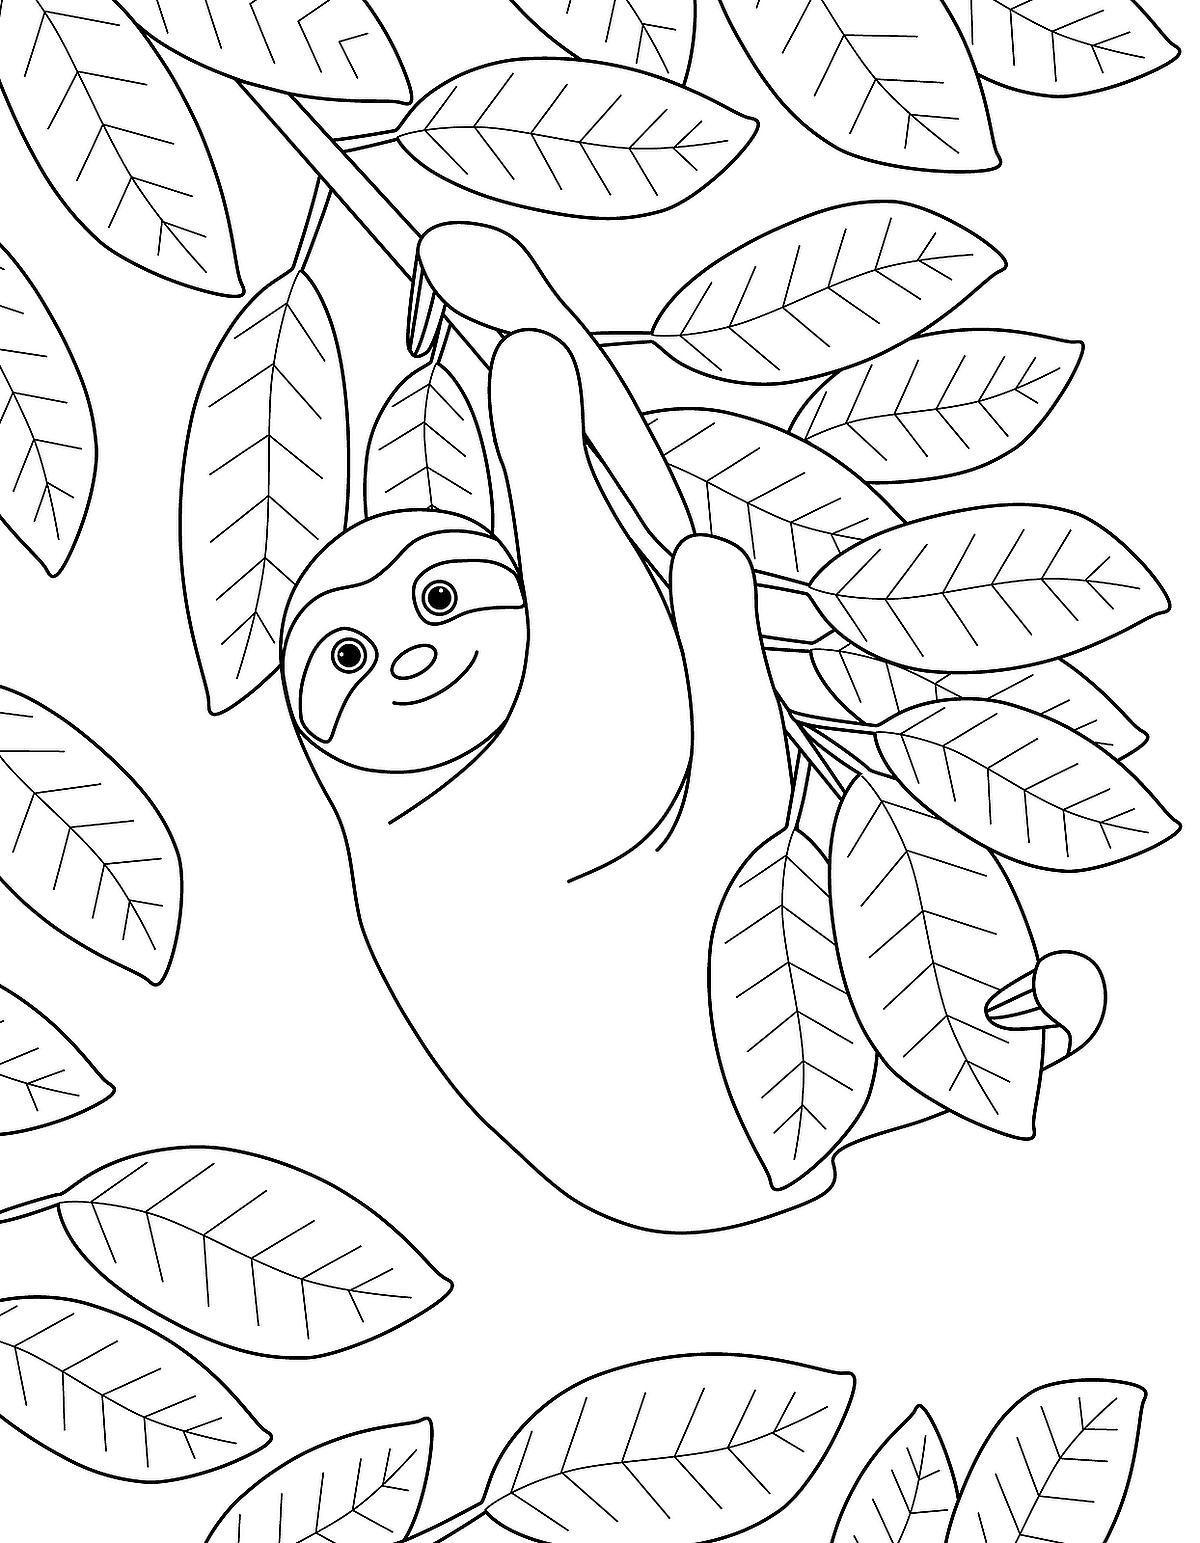 Sloth Coloring Pages: Free Printable Coloring Pages of Sloths to Help You  Slow Down & Relax (Like a Sloth) | Printables | 30Seconds Mom